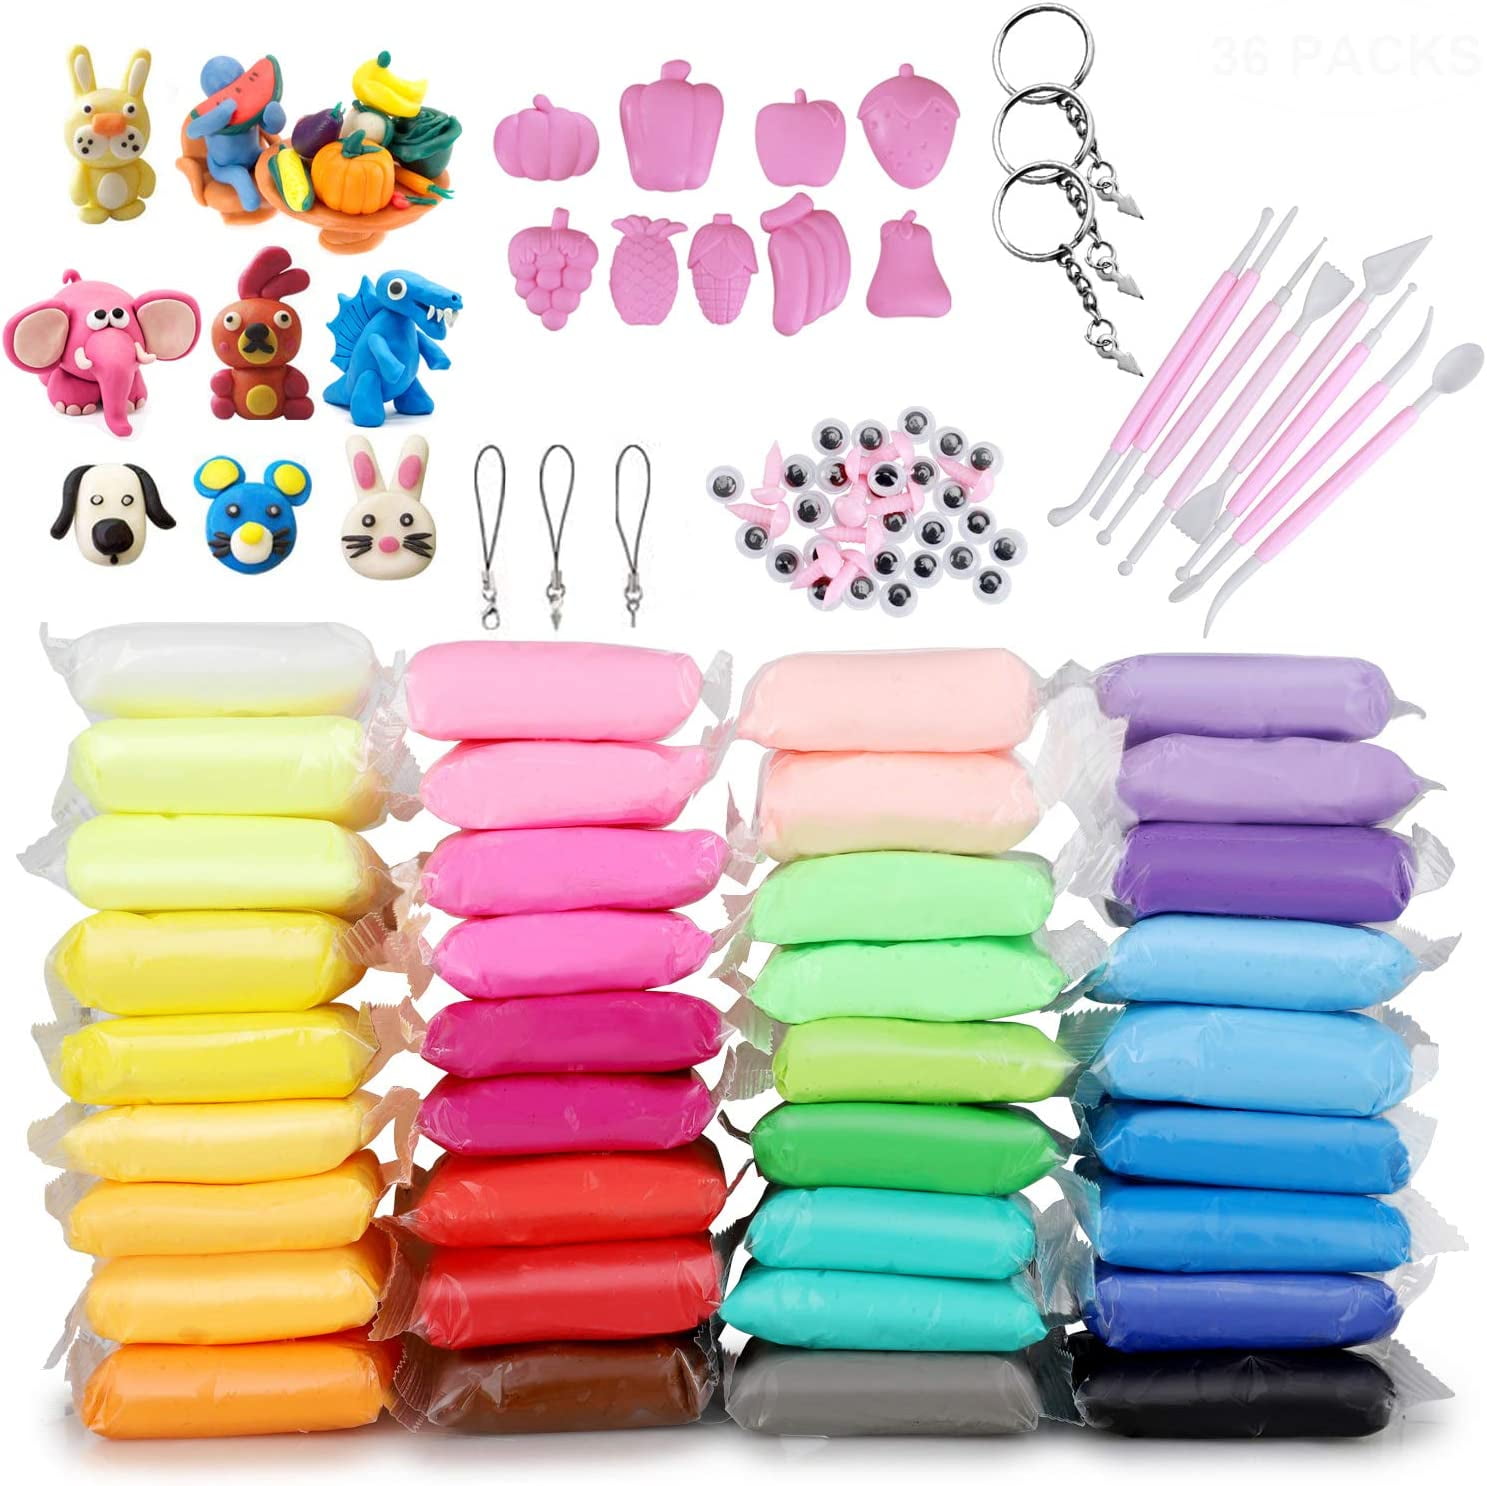 36 Pack Modeling Clay Ultra Light Air Dry Lehm Magic Clay Plasticine Artist  Studio Toys For Diy Art And Crafts Projects Gift